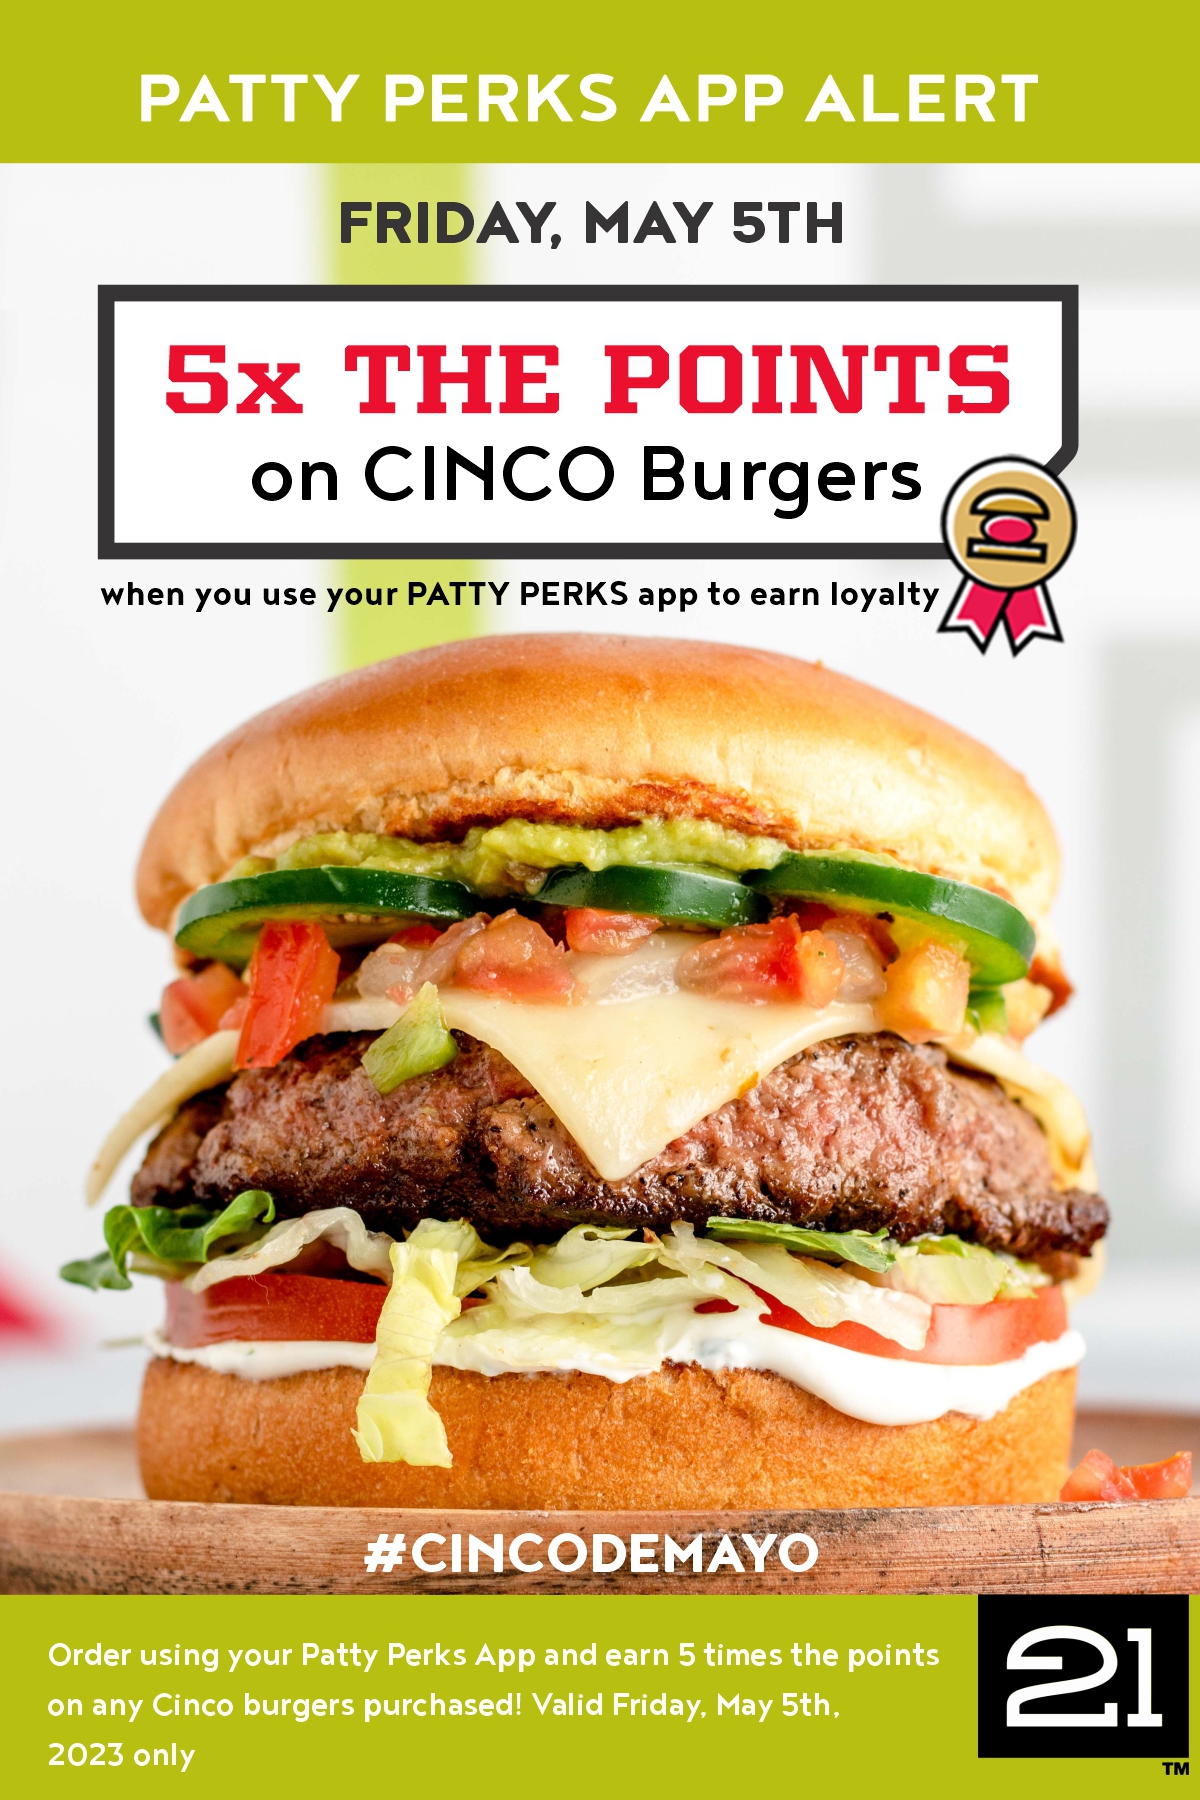 Use your Patty Perks App 
for 5x The Points on any Cinco Burgers to celebrate 
Cinco De Mayo! No limits on number purchased. 
Valid May 5th, 2023 only.